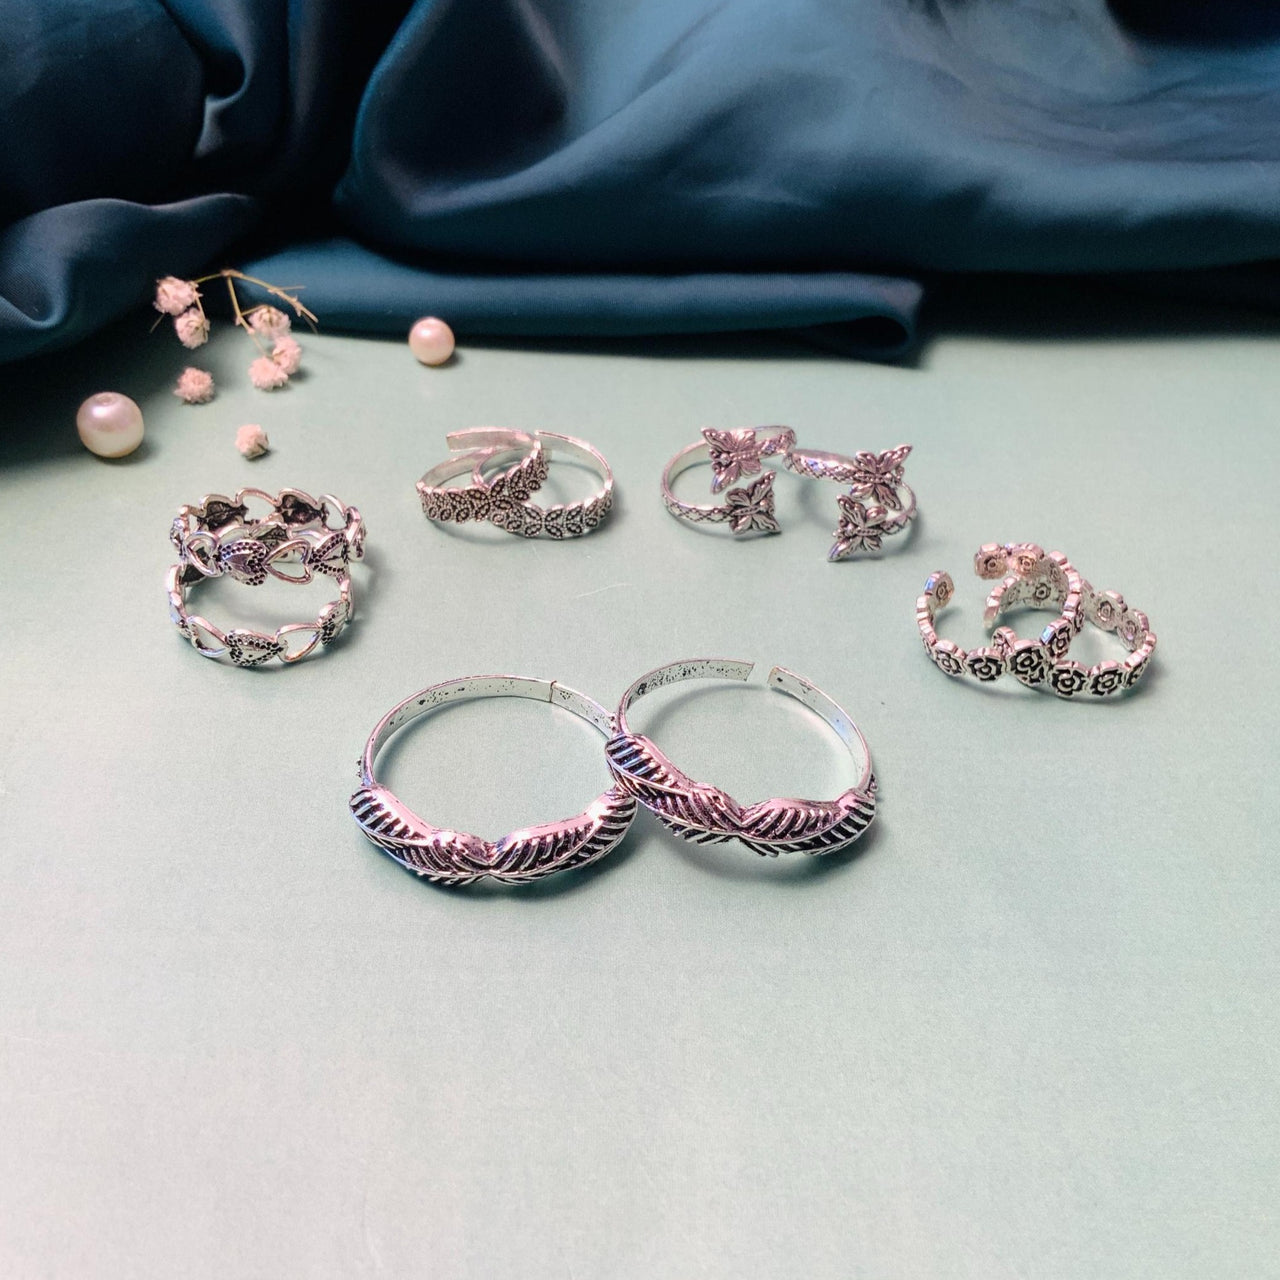 Appealing Silver Oxidsed Pack of 5 Pairs Toe Rings Combo - Abdesignsjewellery